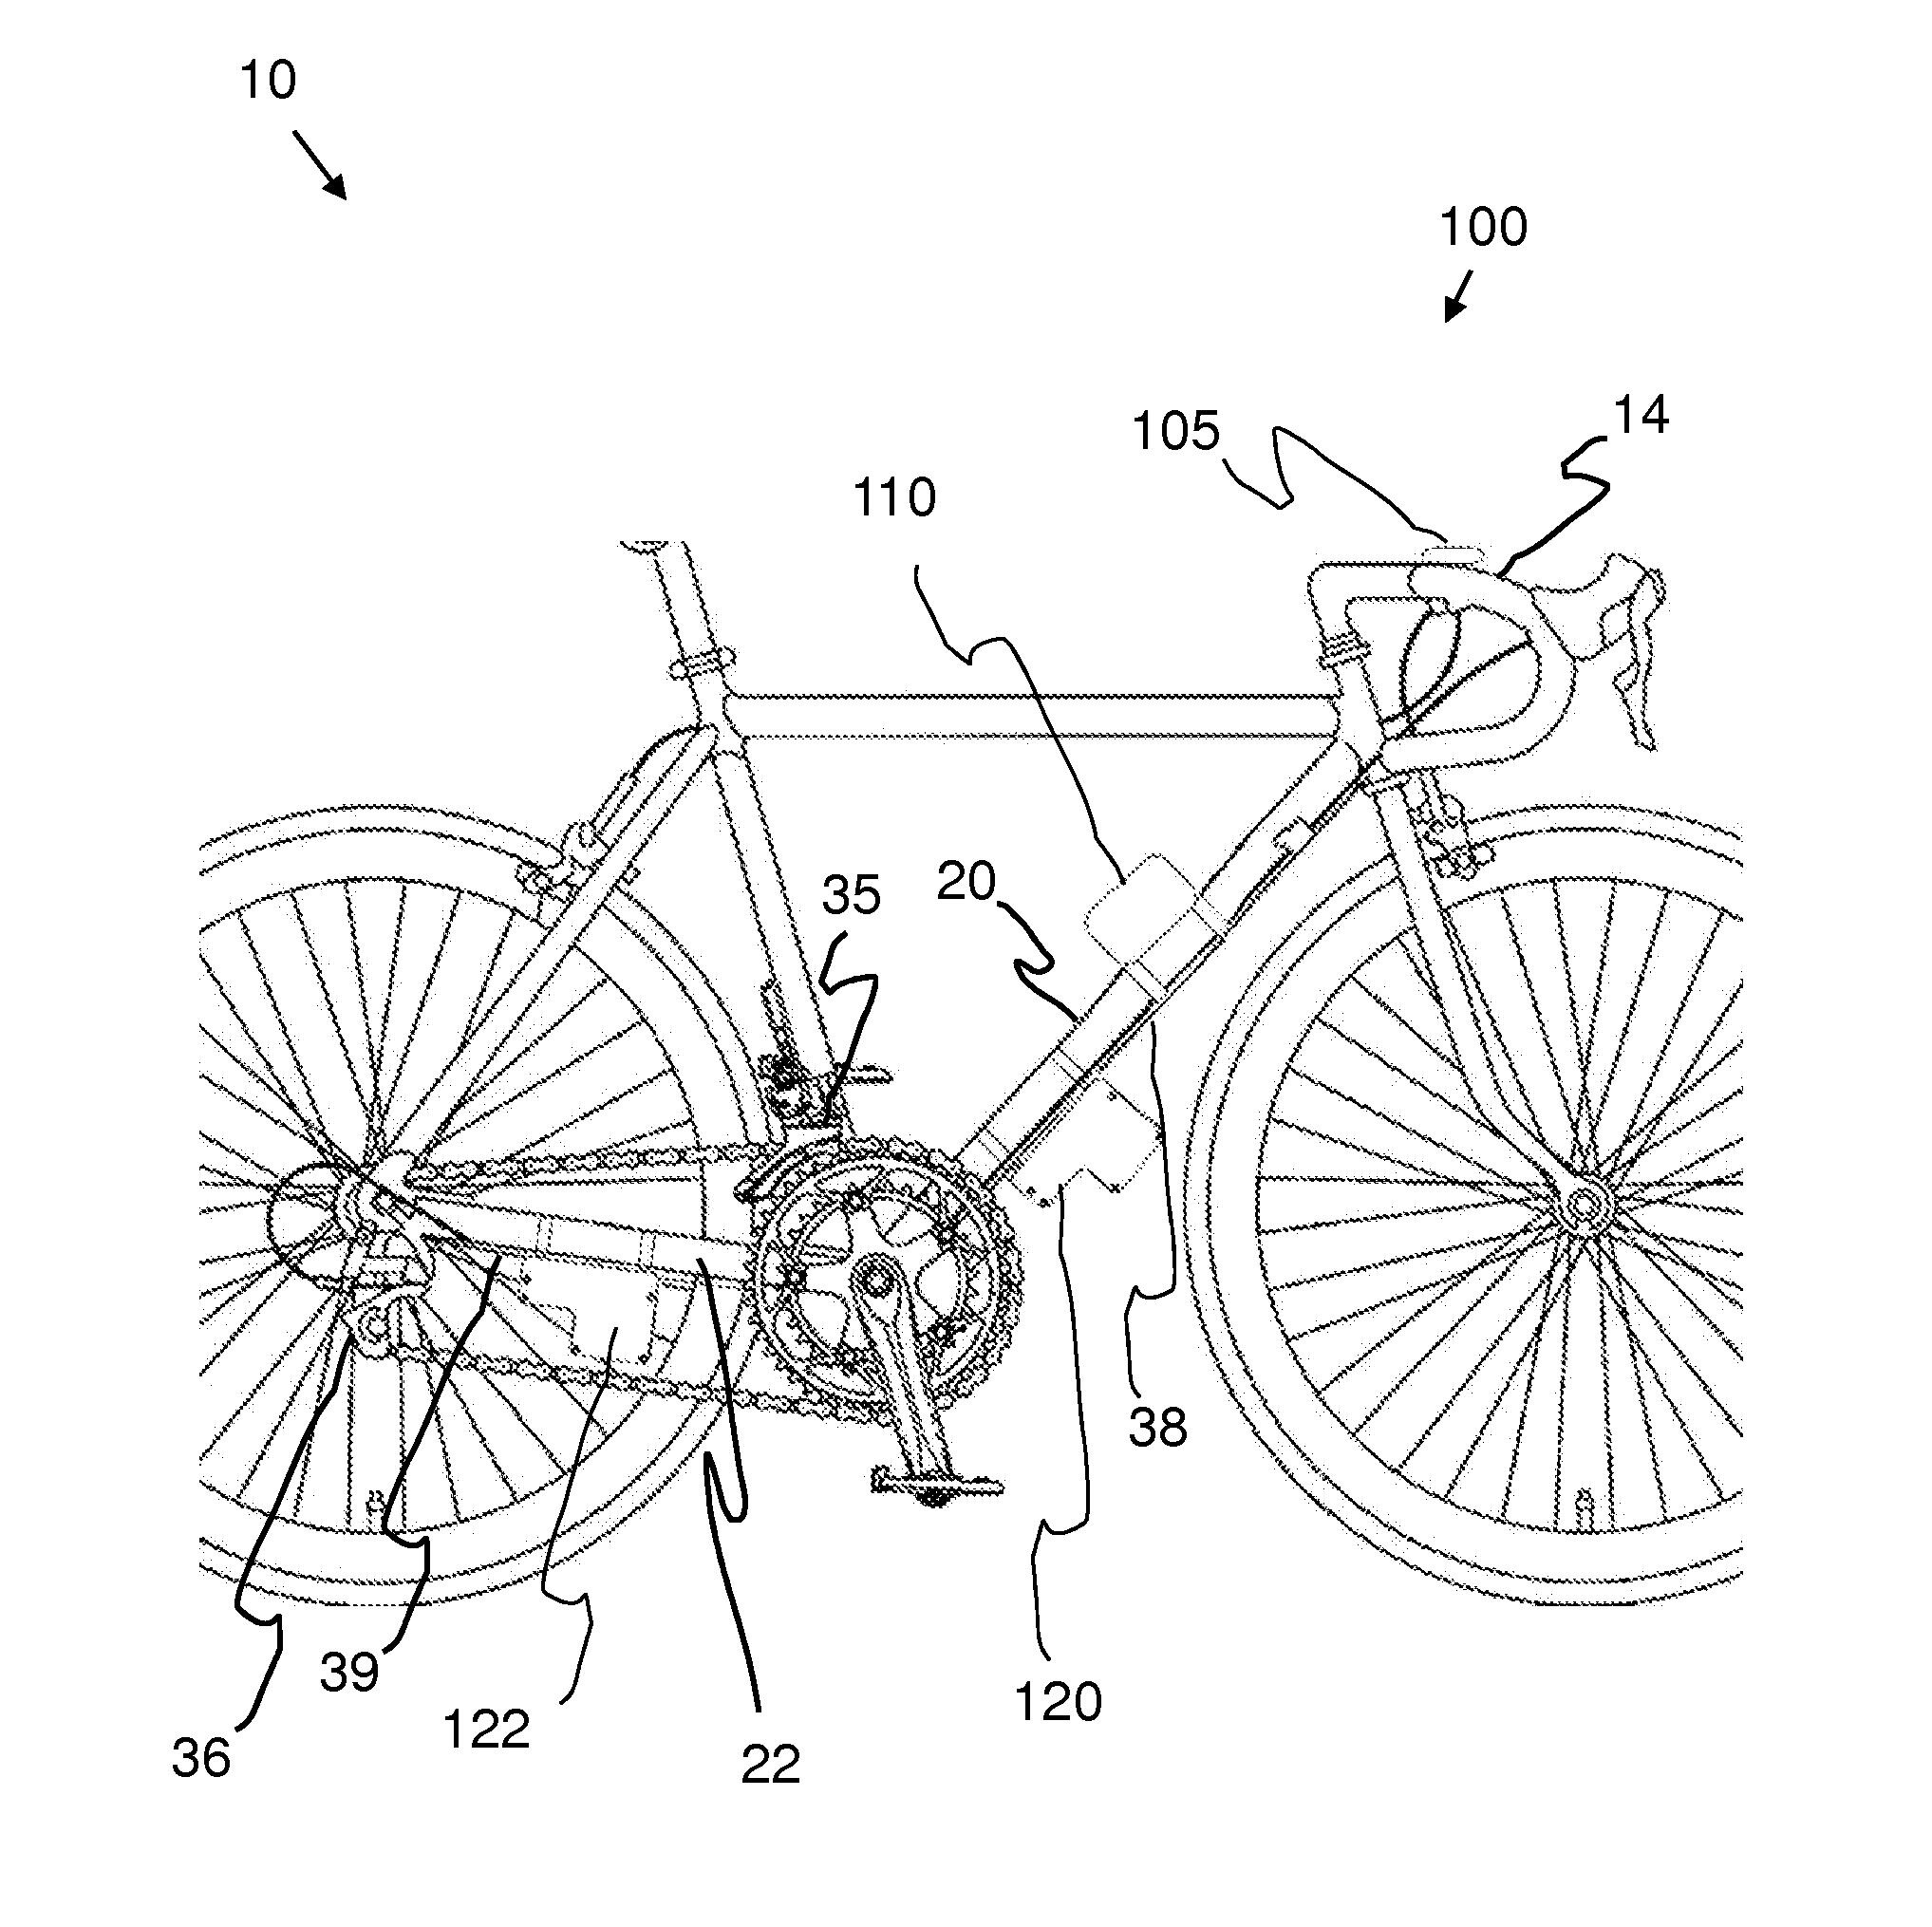 Electro mechanical bicycle derailleur actuator system and method